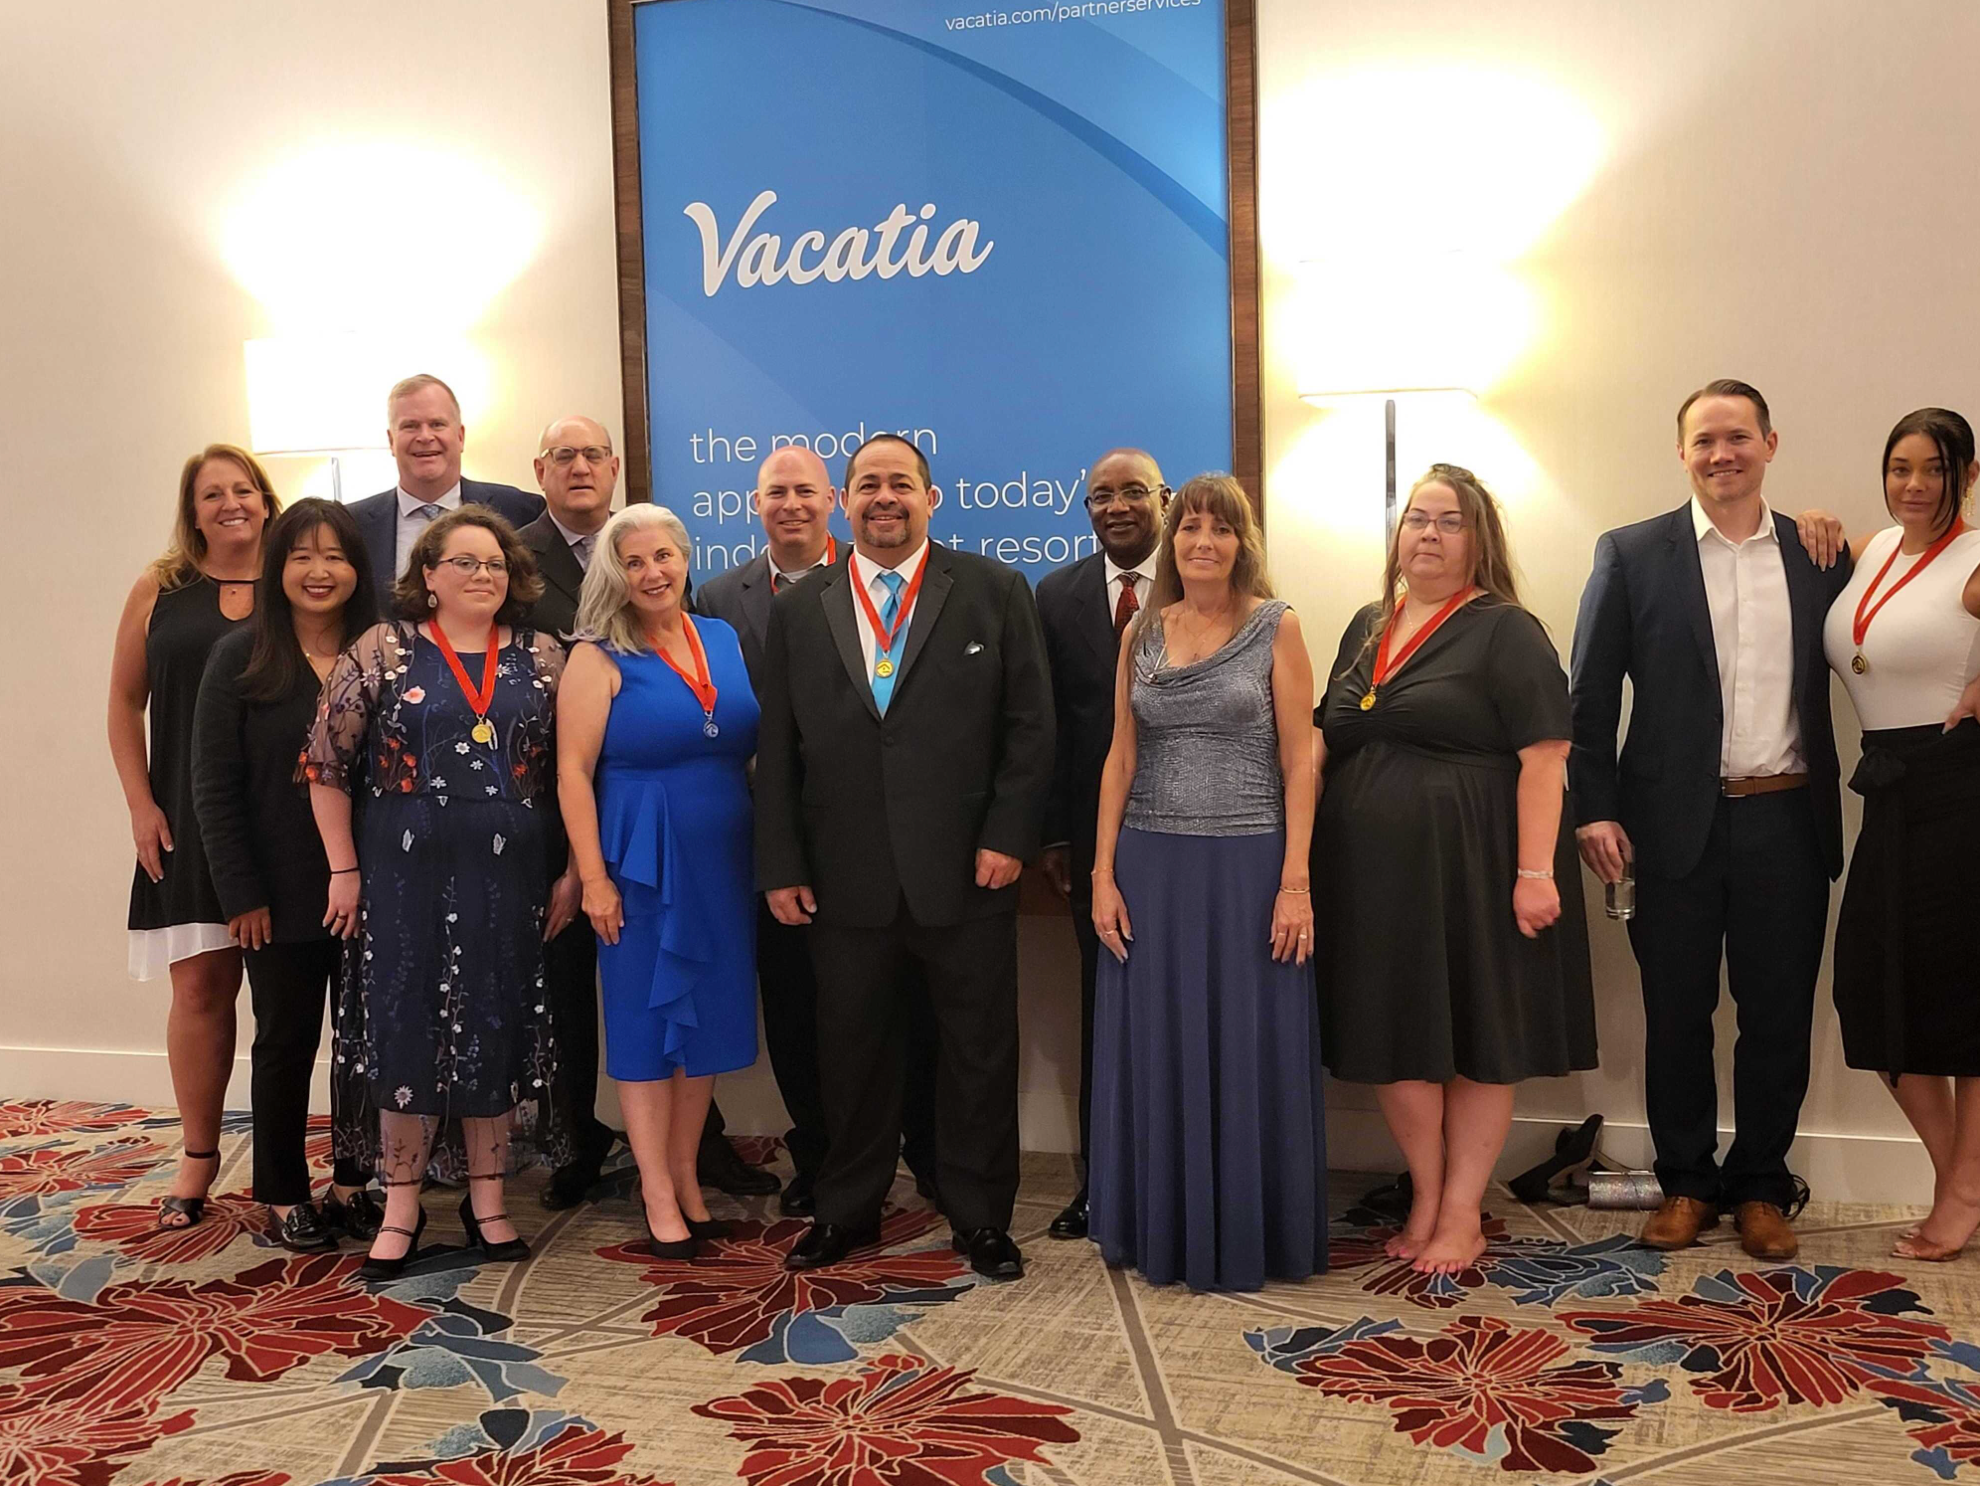 The Vacatia team after the awards ceremony during the annual American Resort Development Association conference.